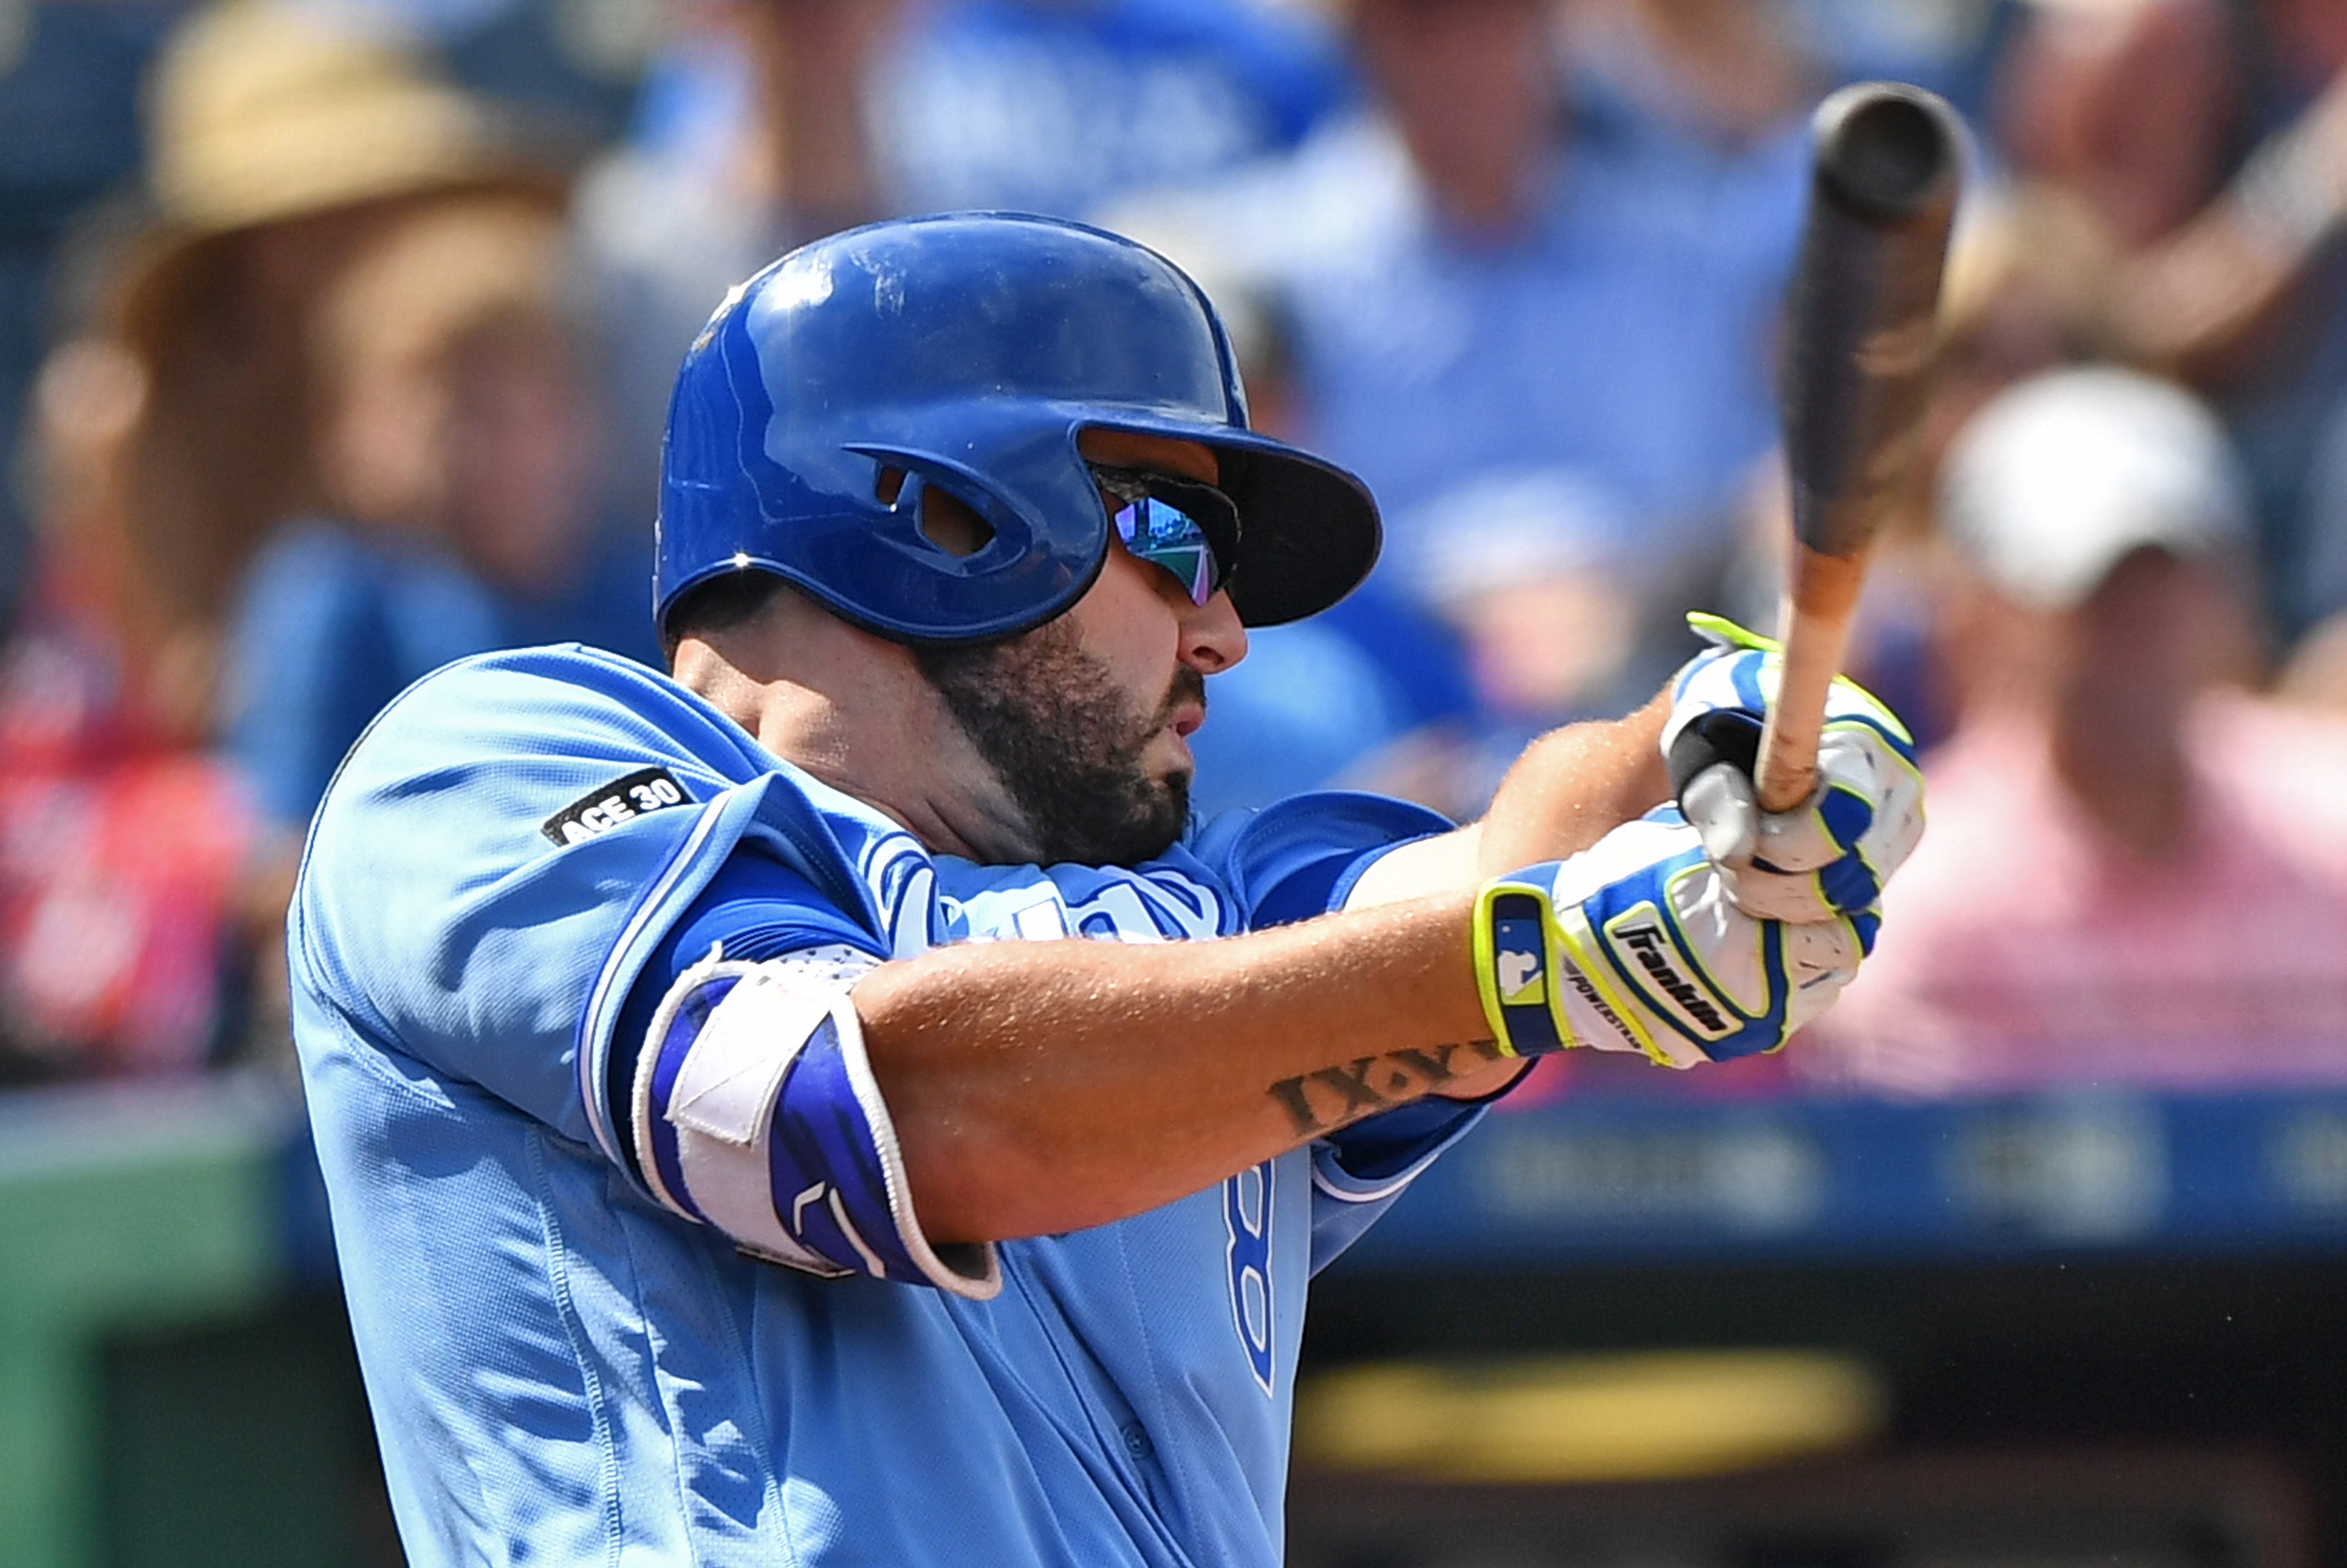 ALCS: Defensive gems by Mike Moustakas help keep O's in check